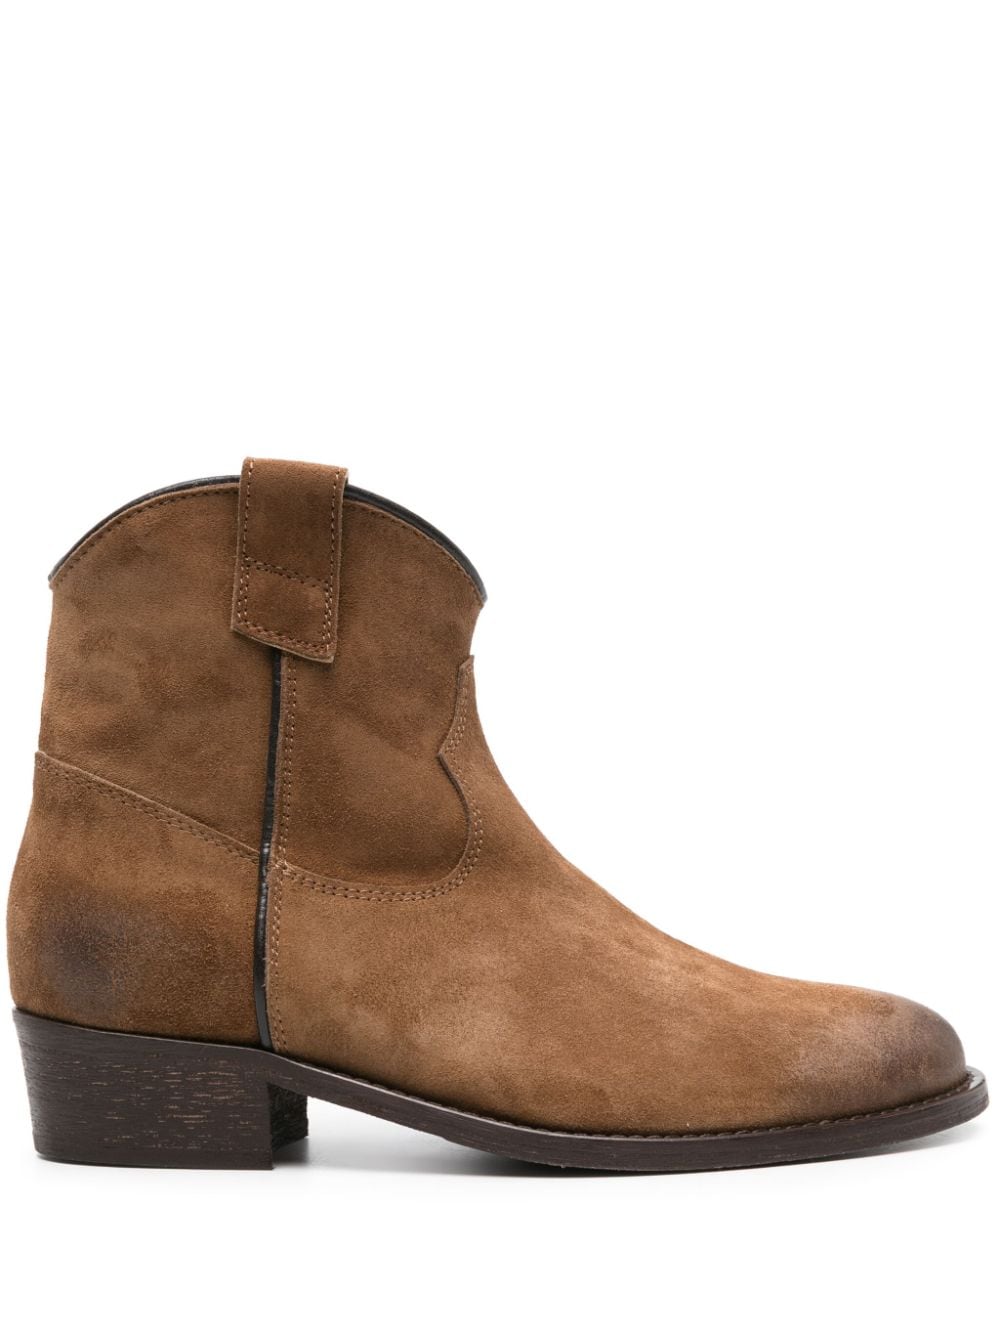 panelled suede ankle boots